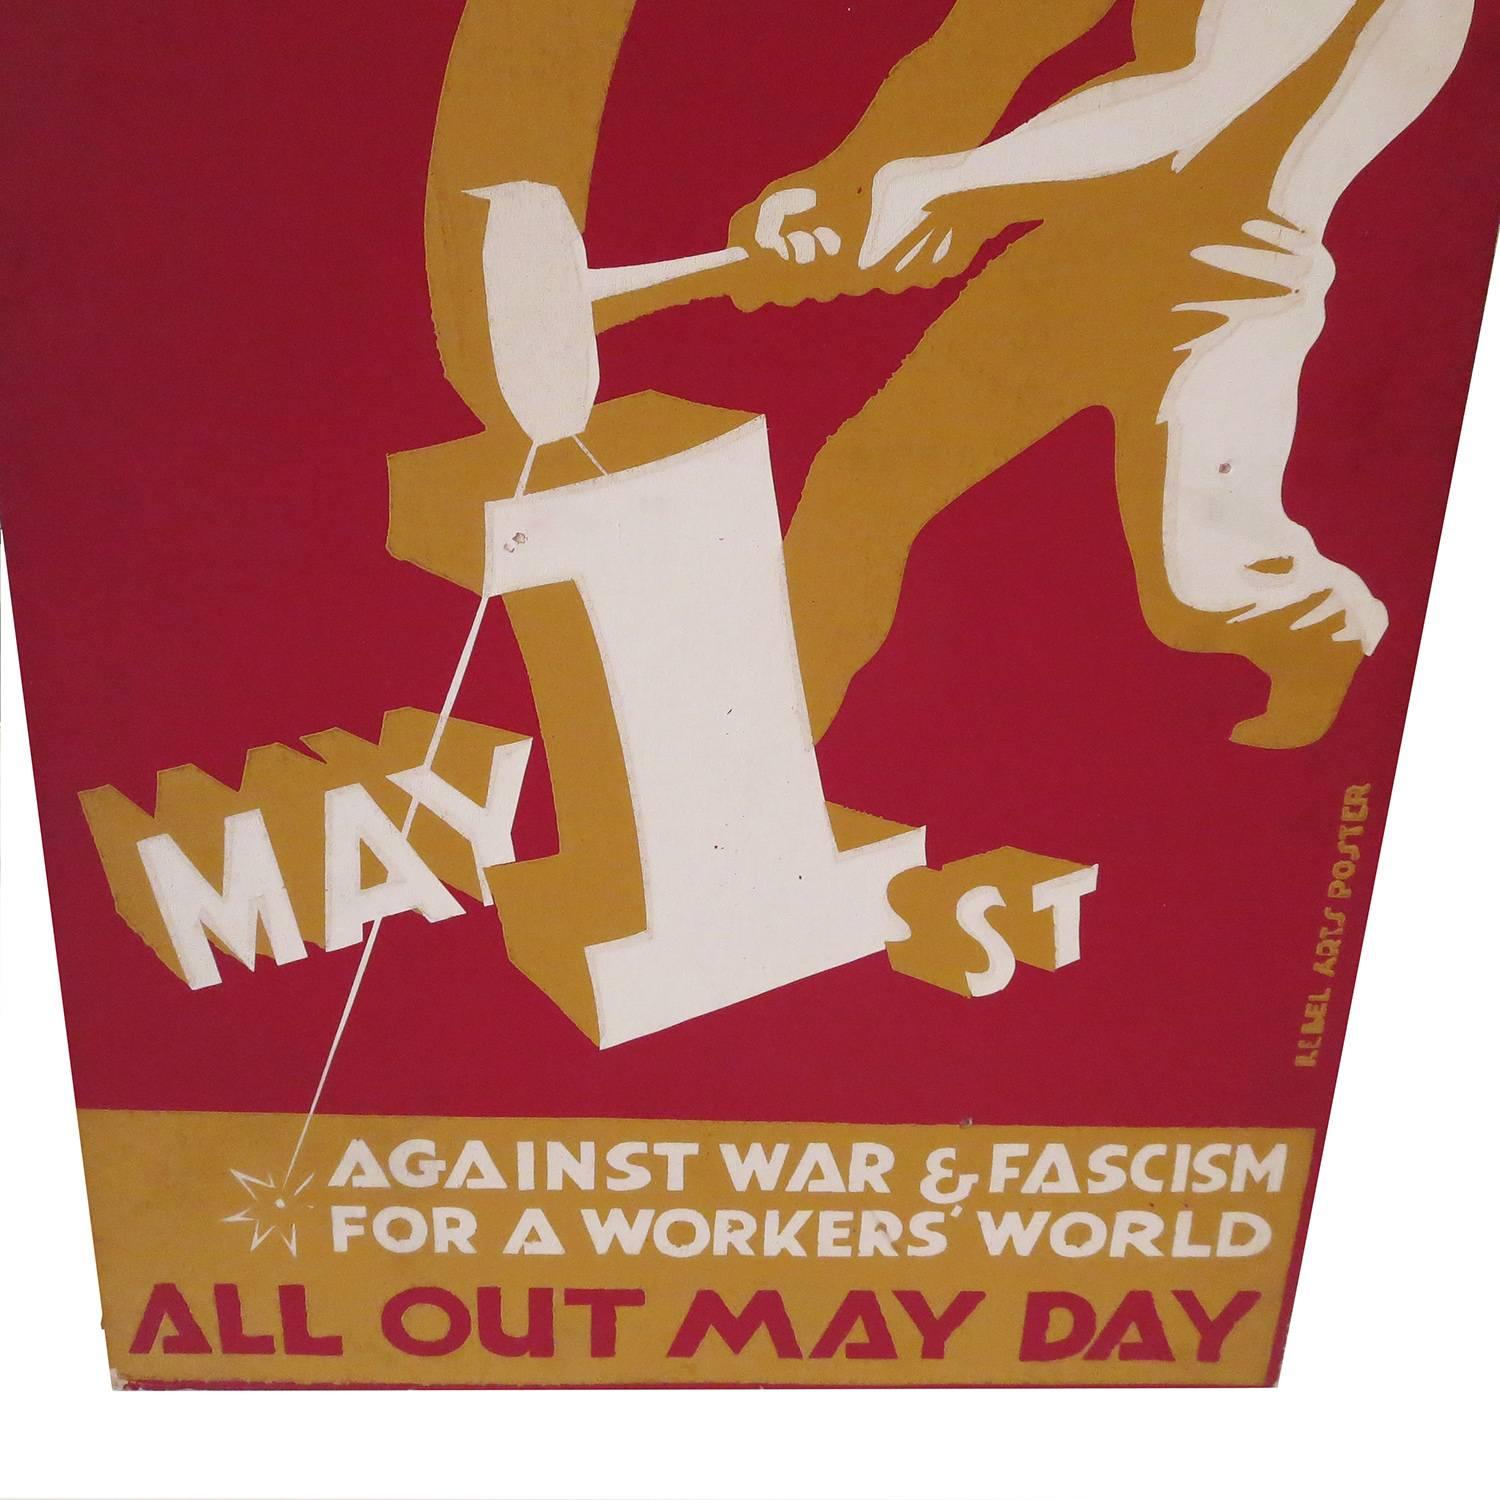 Art Deco 1930s Socialist May Day Demonstration Poster by Rebel Arts Group, New York